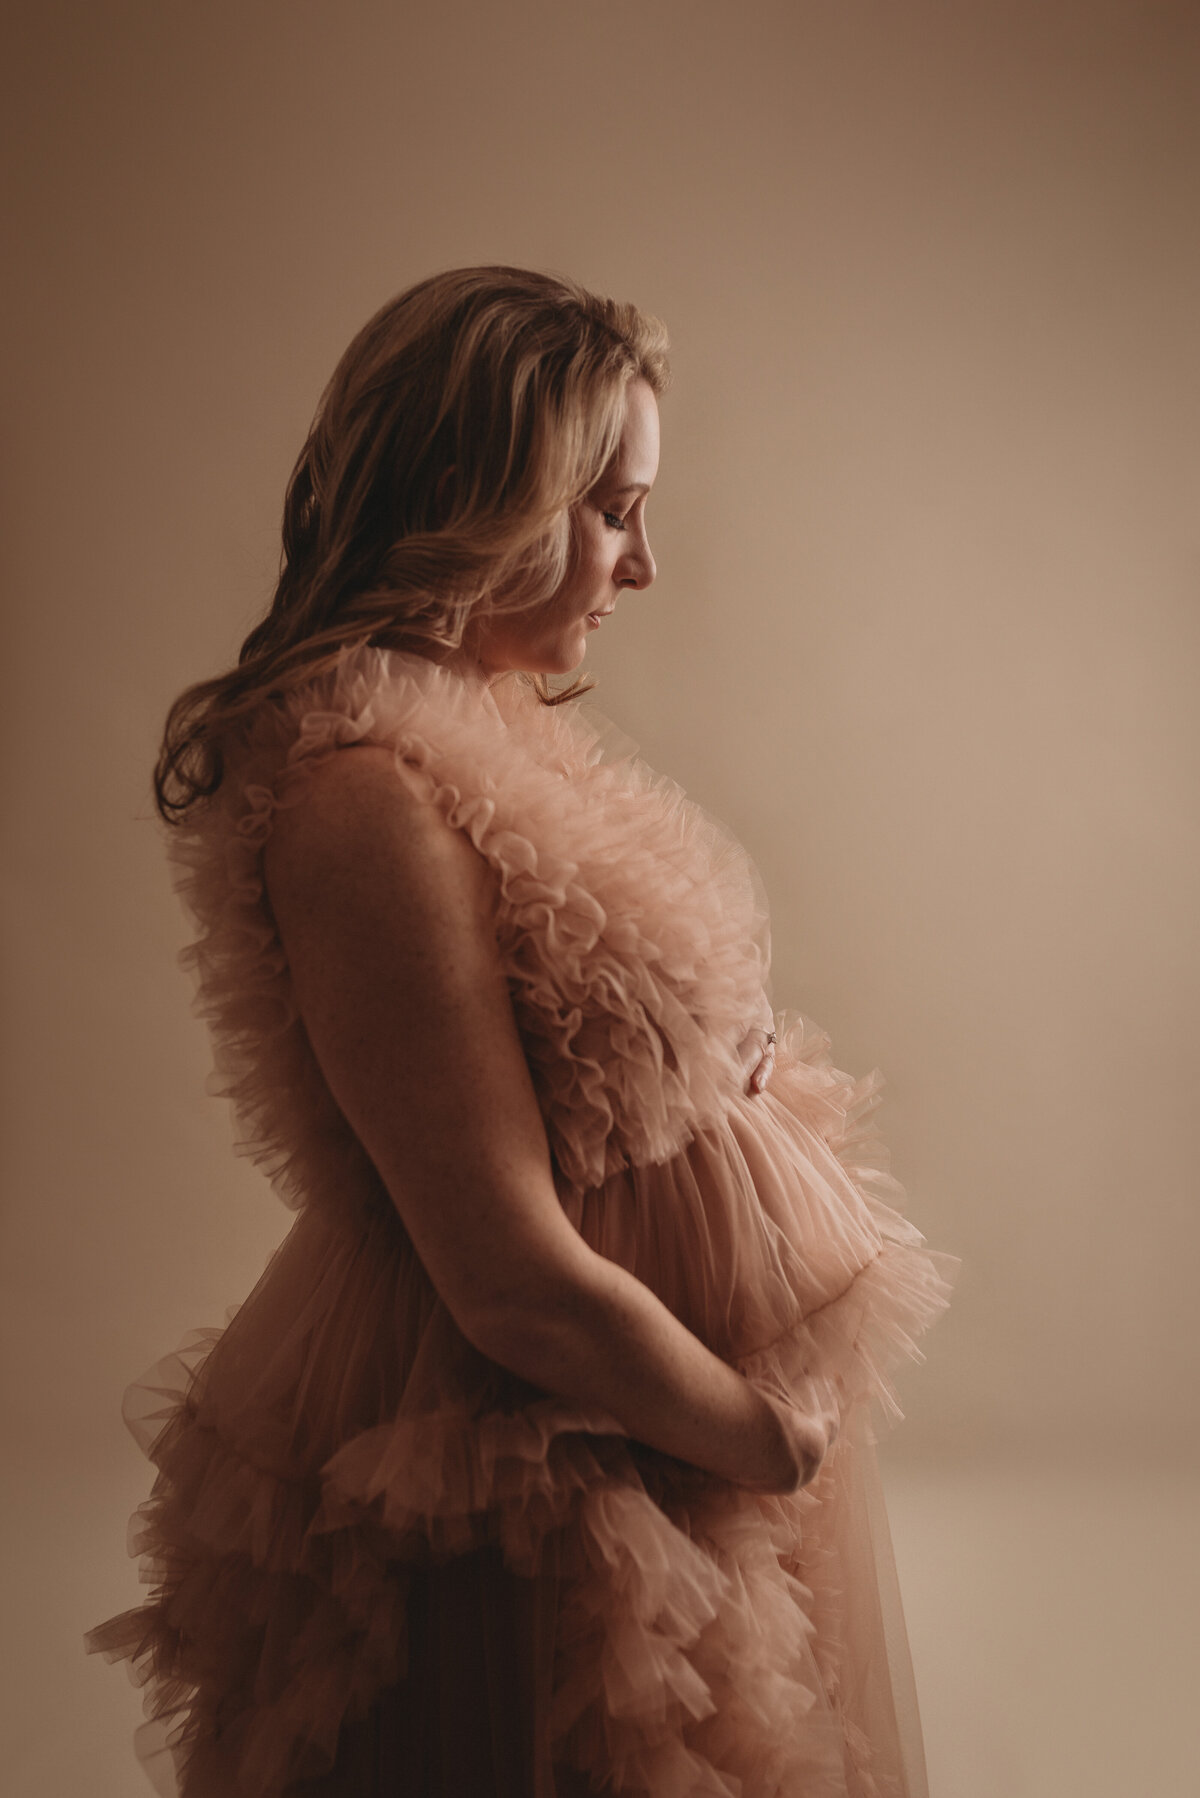 Blonde haired pregnant woman at Marietta GA maternity photography studio standing to the side showing tummy  in blush ruffle dress holding baby bump